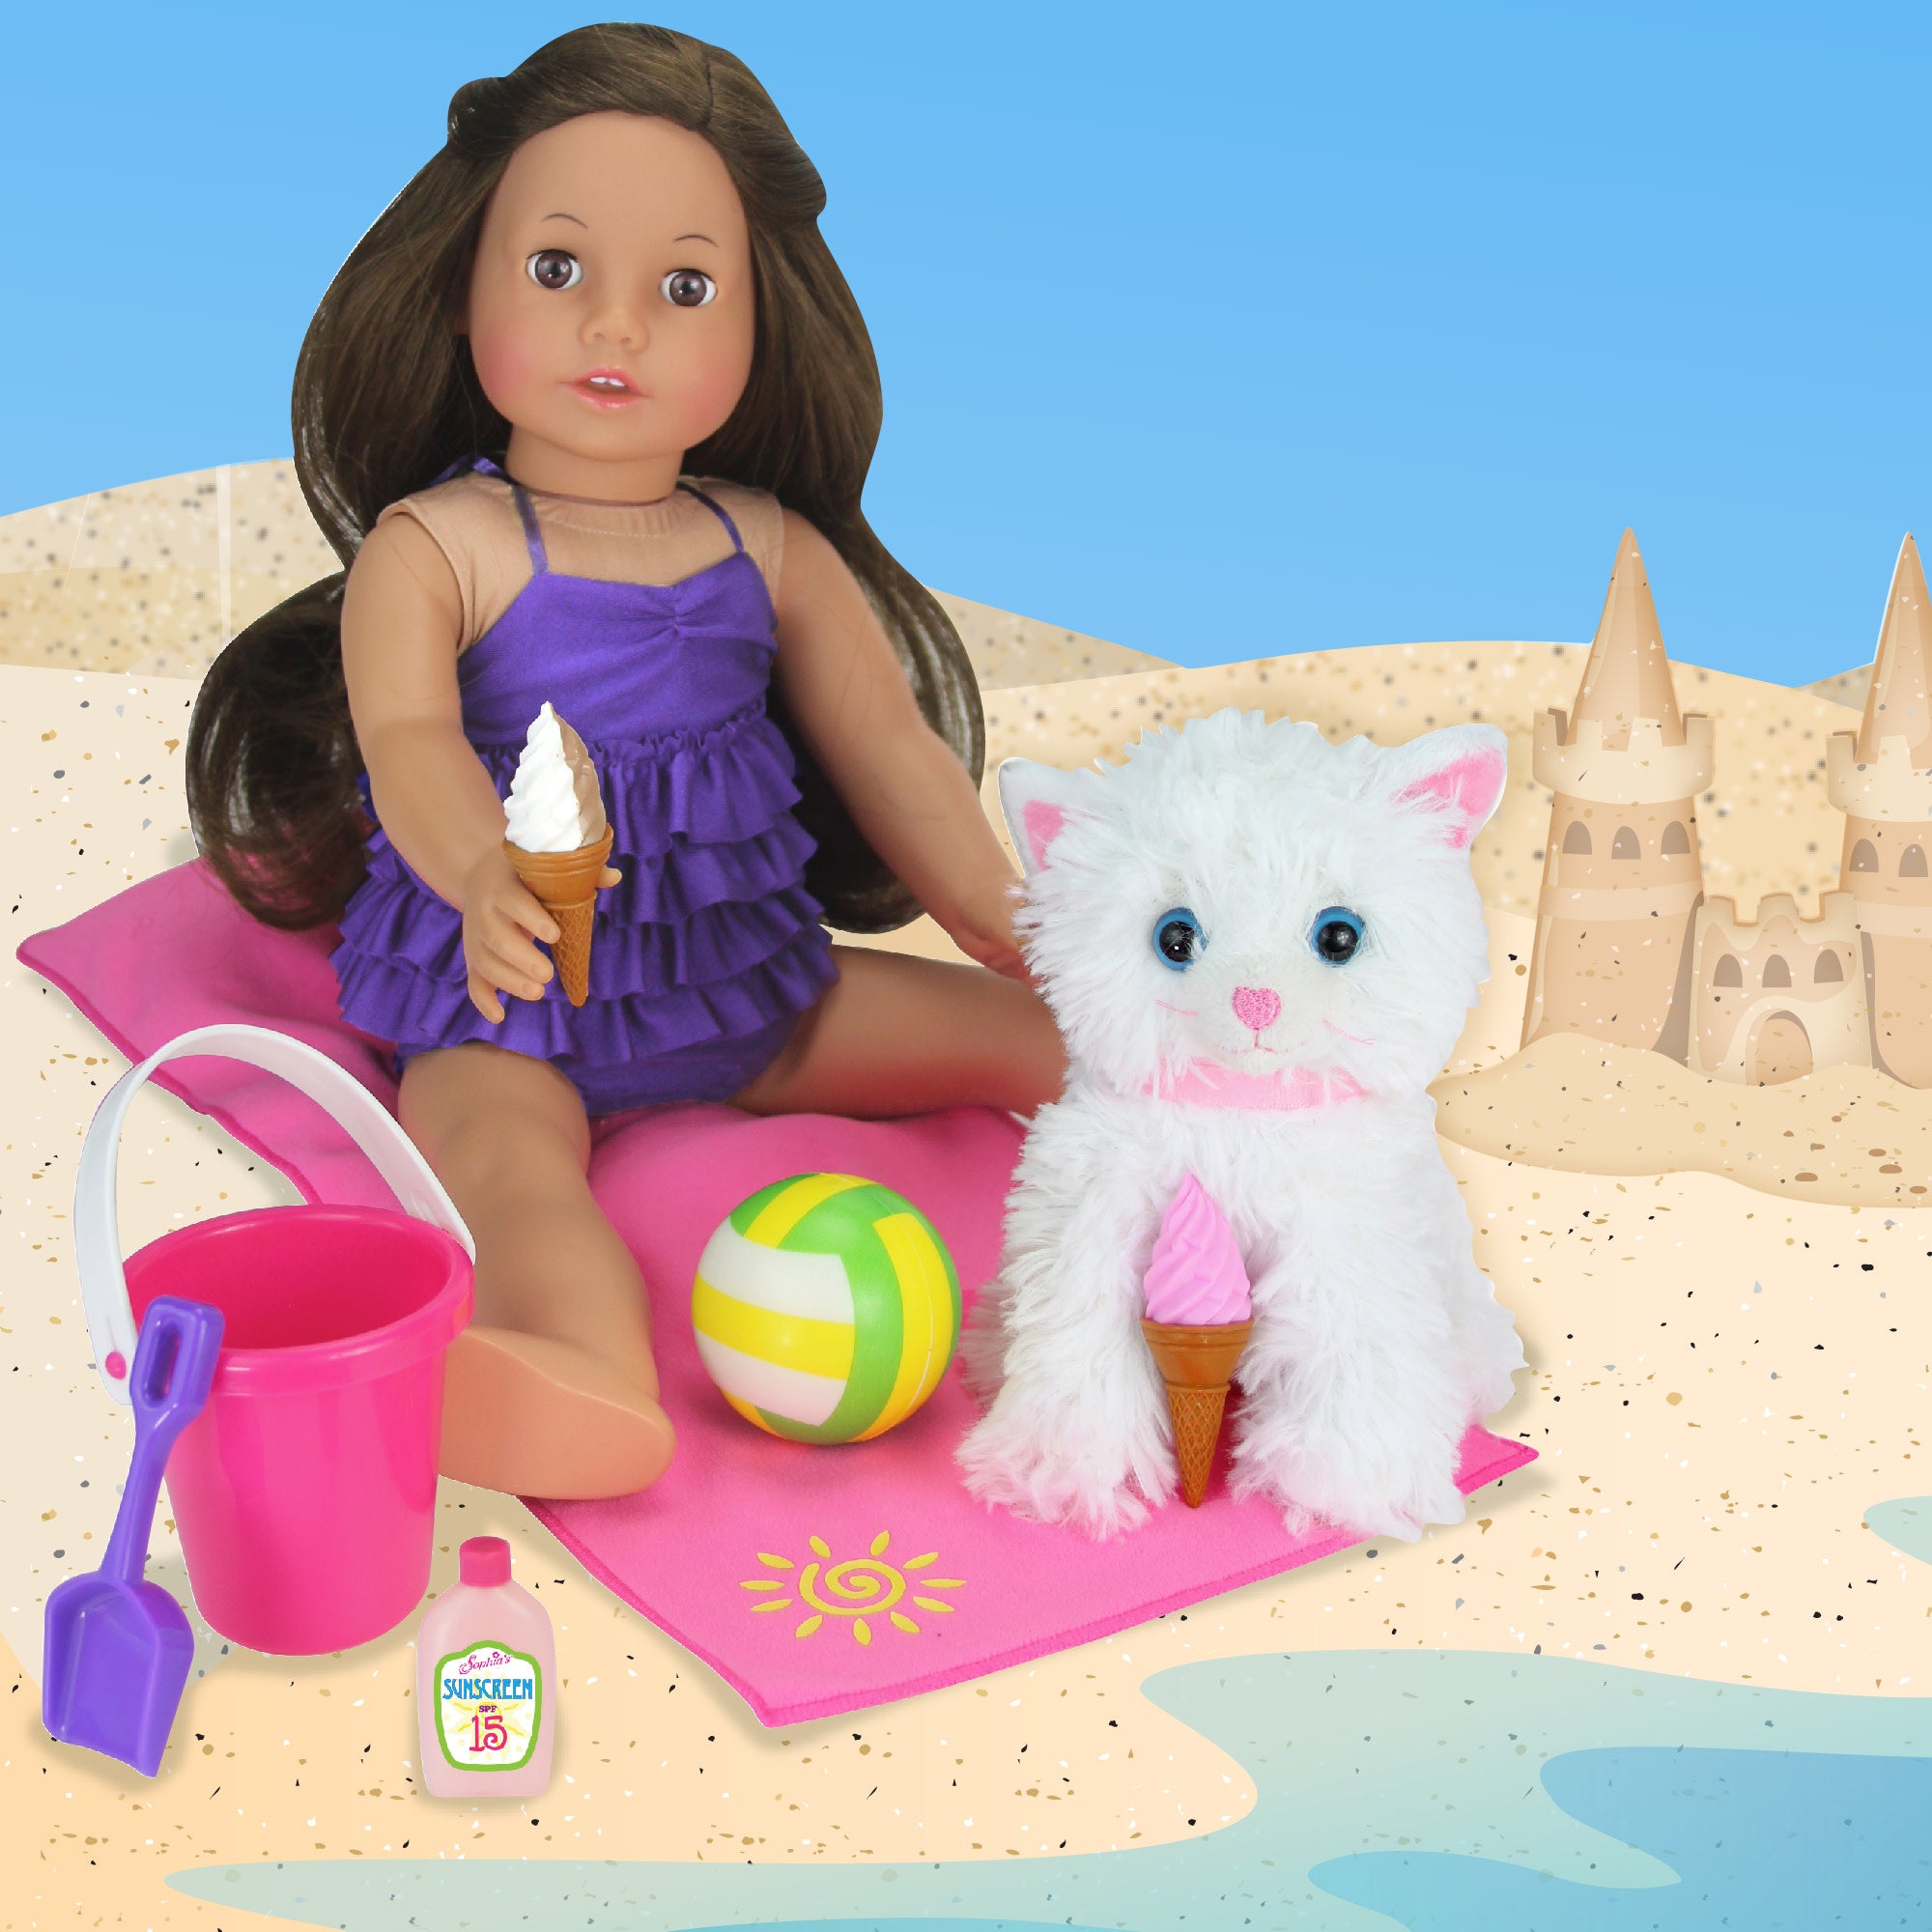 Sophia’s Complete Beach Day Play Set with Towel, Bucket, Shovel, Ball, Ice Cream Cones, Ice Cream Holder, & Pretend Sunscreen Bottle for 18” Dolls